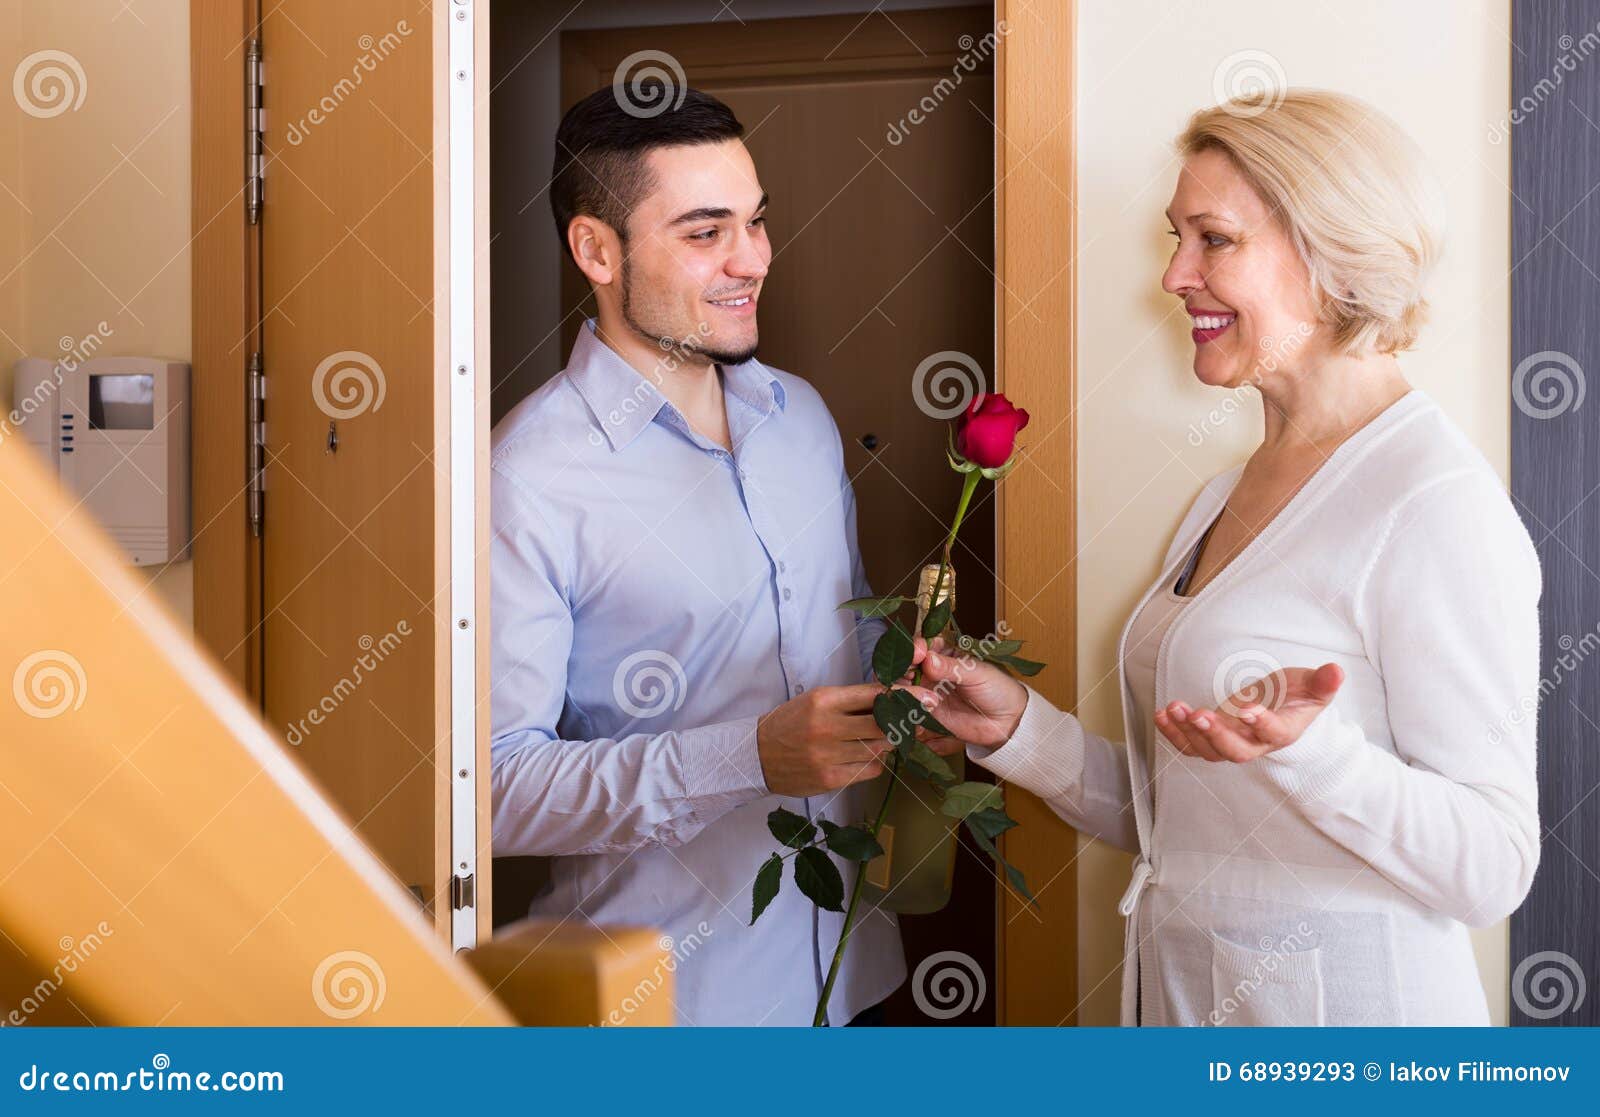 Mature Woman And Young Guy At Doorway Stock Image Image Of